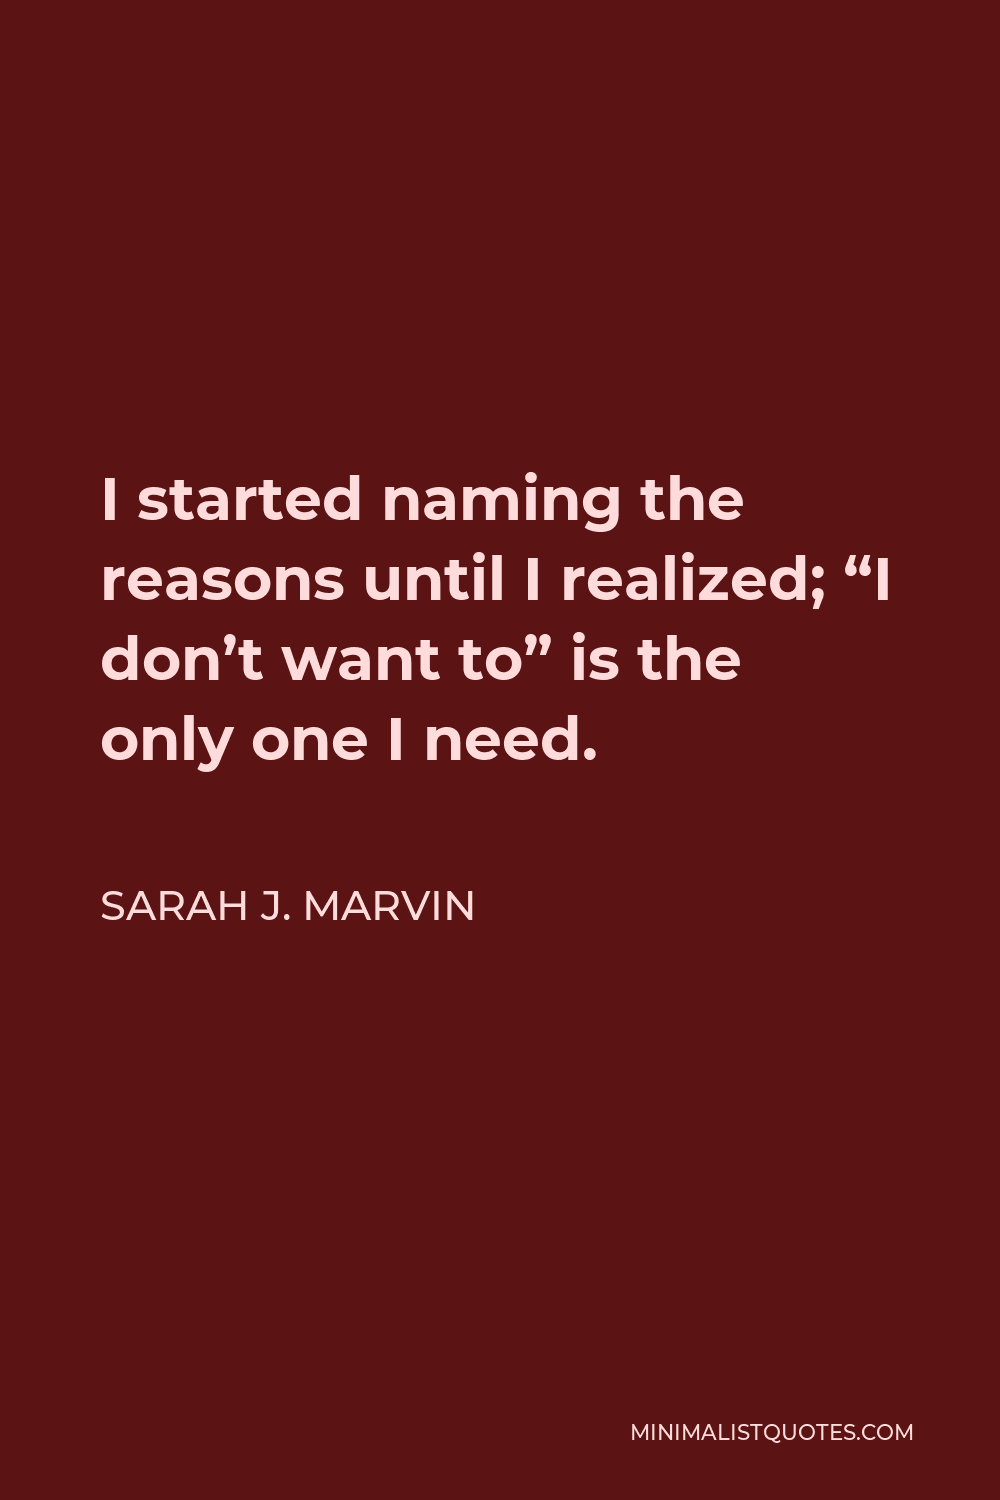 Sarah J. Marvin Quote - I started naming the reasons, until I realized; “I don’t want to” is the only one I need.